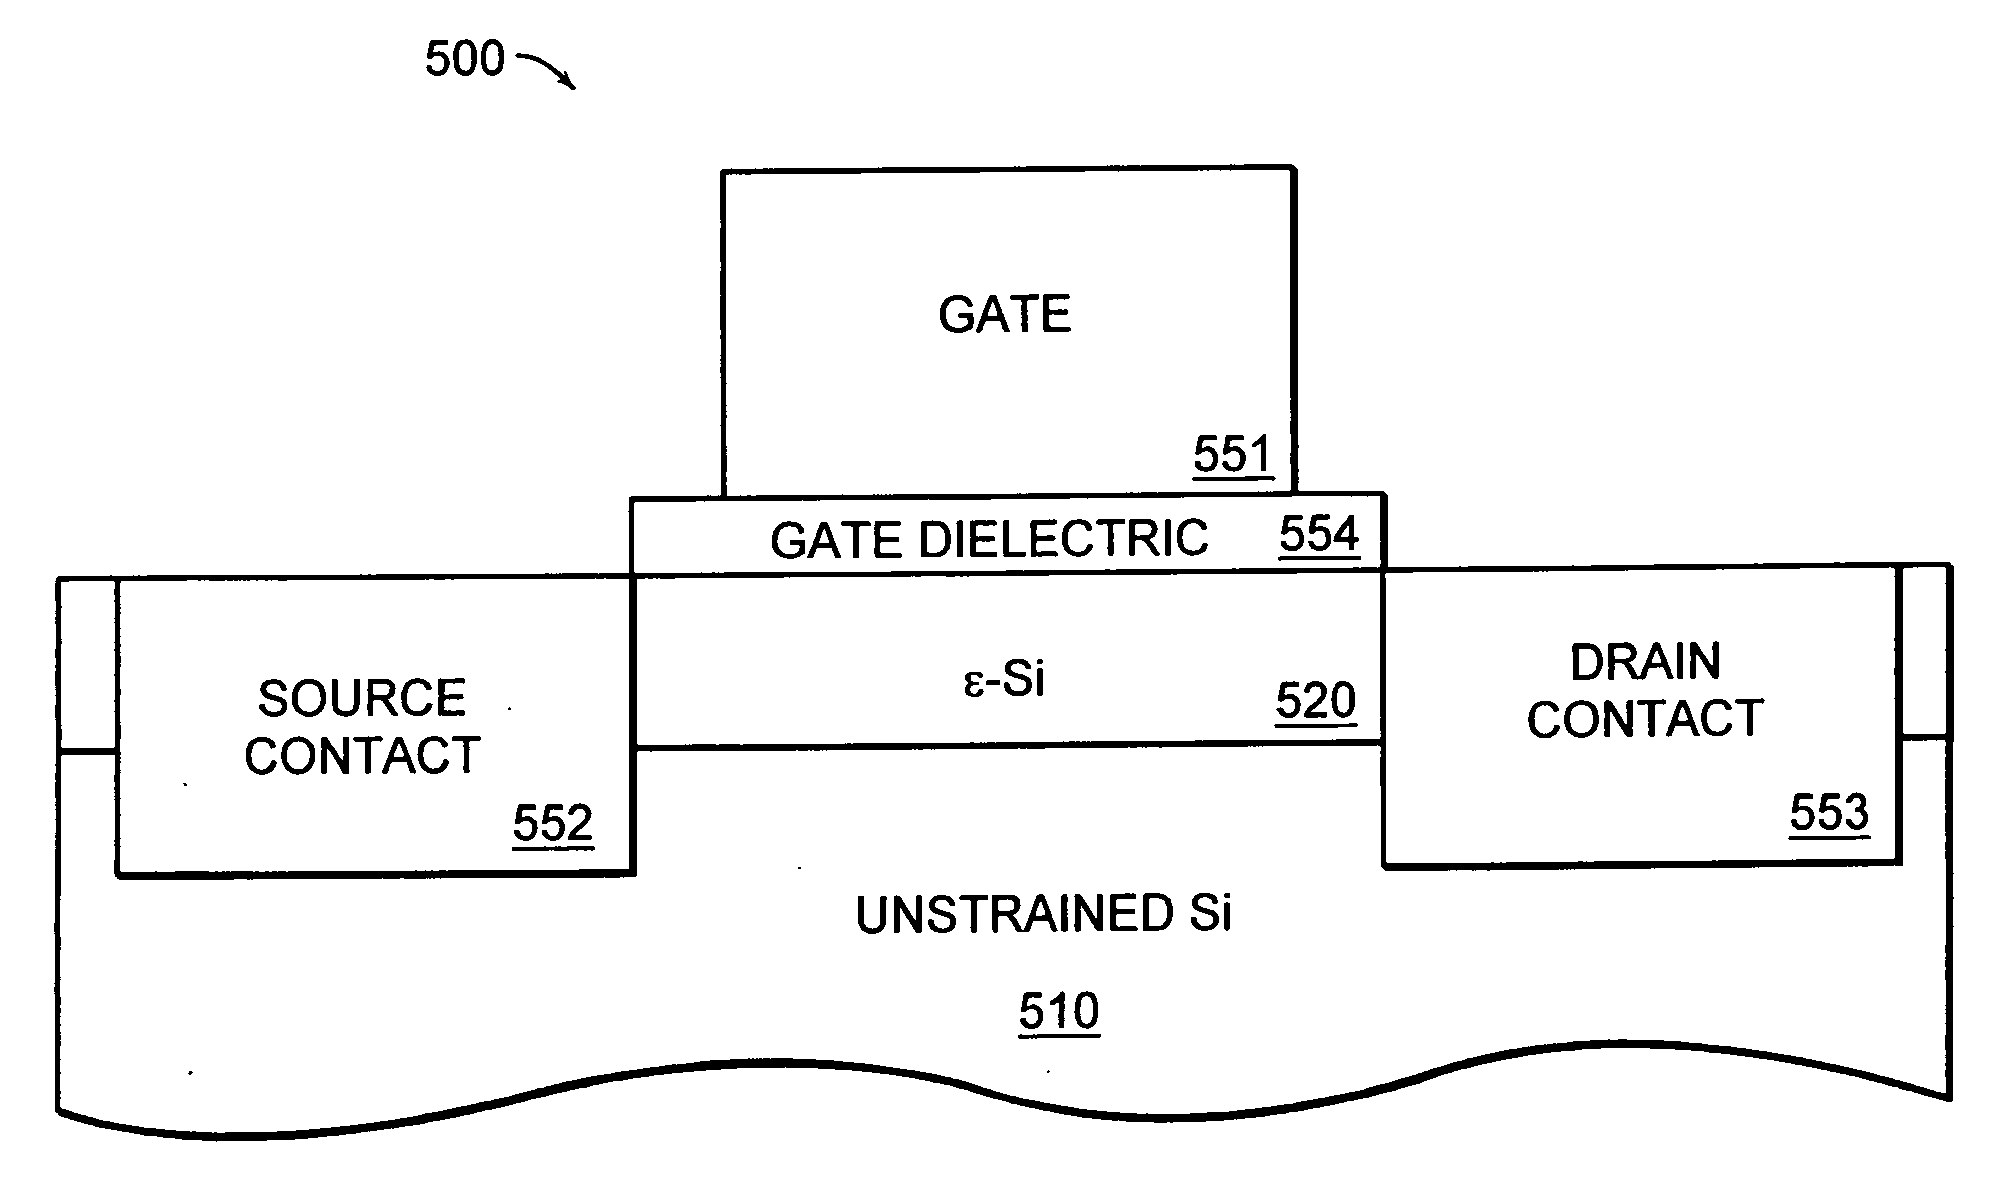 Semiconductor devices having bonded interfaces and methods for making the same